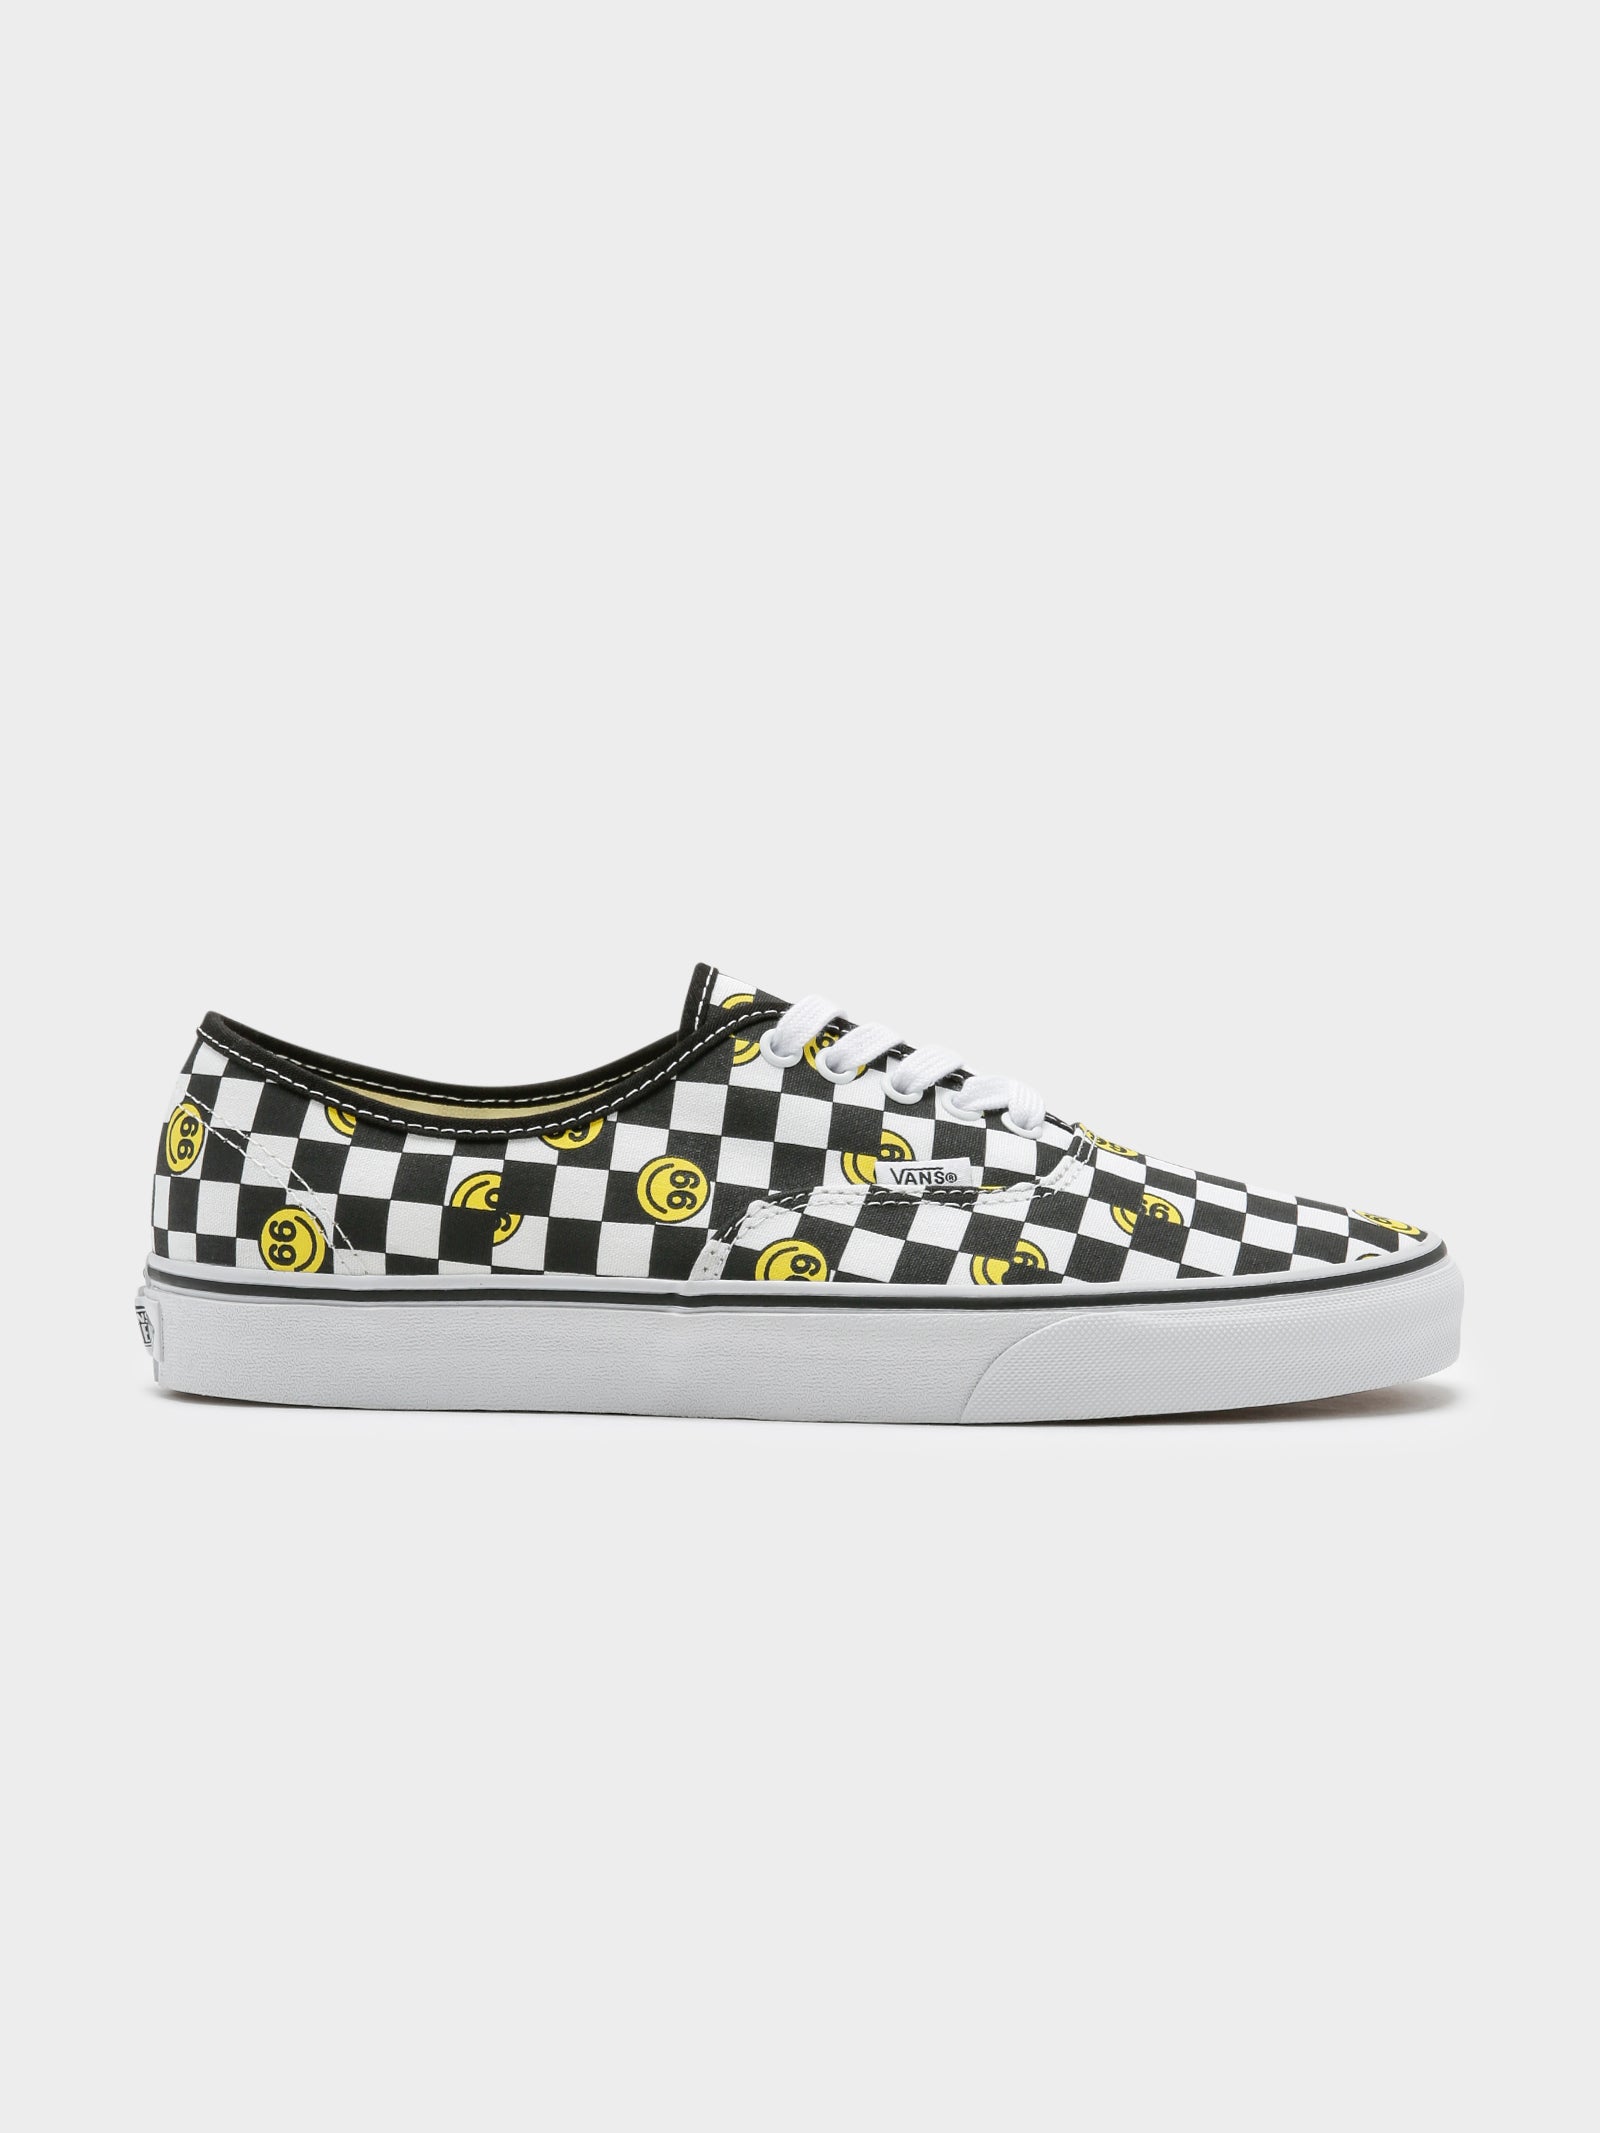 Unisex Authentic Smiley Sneakers in Black & White